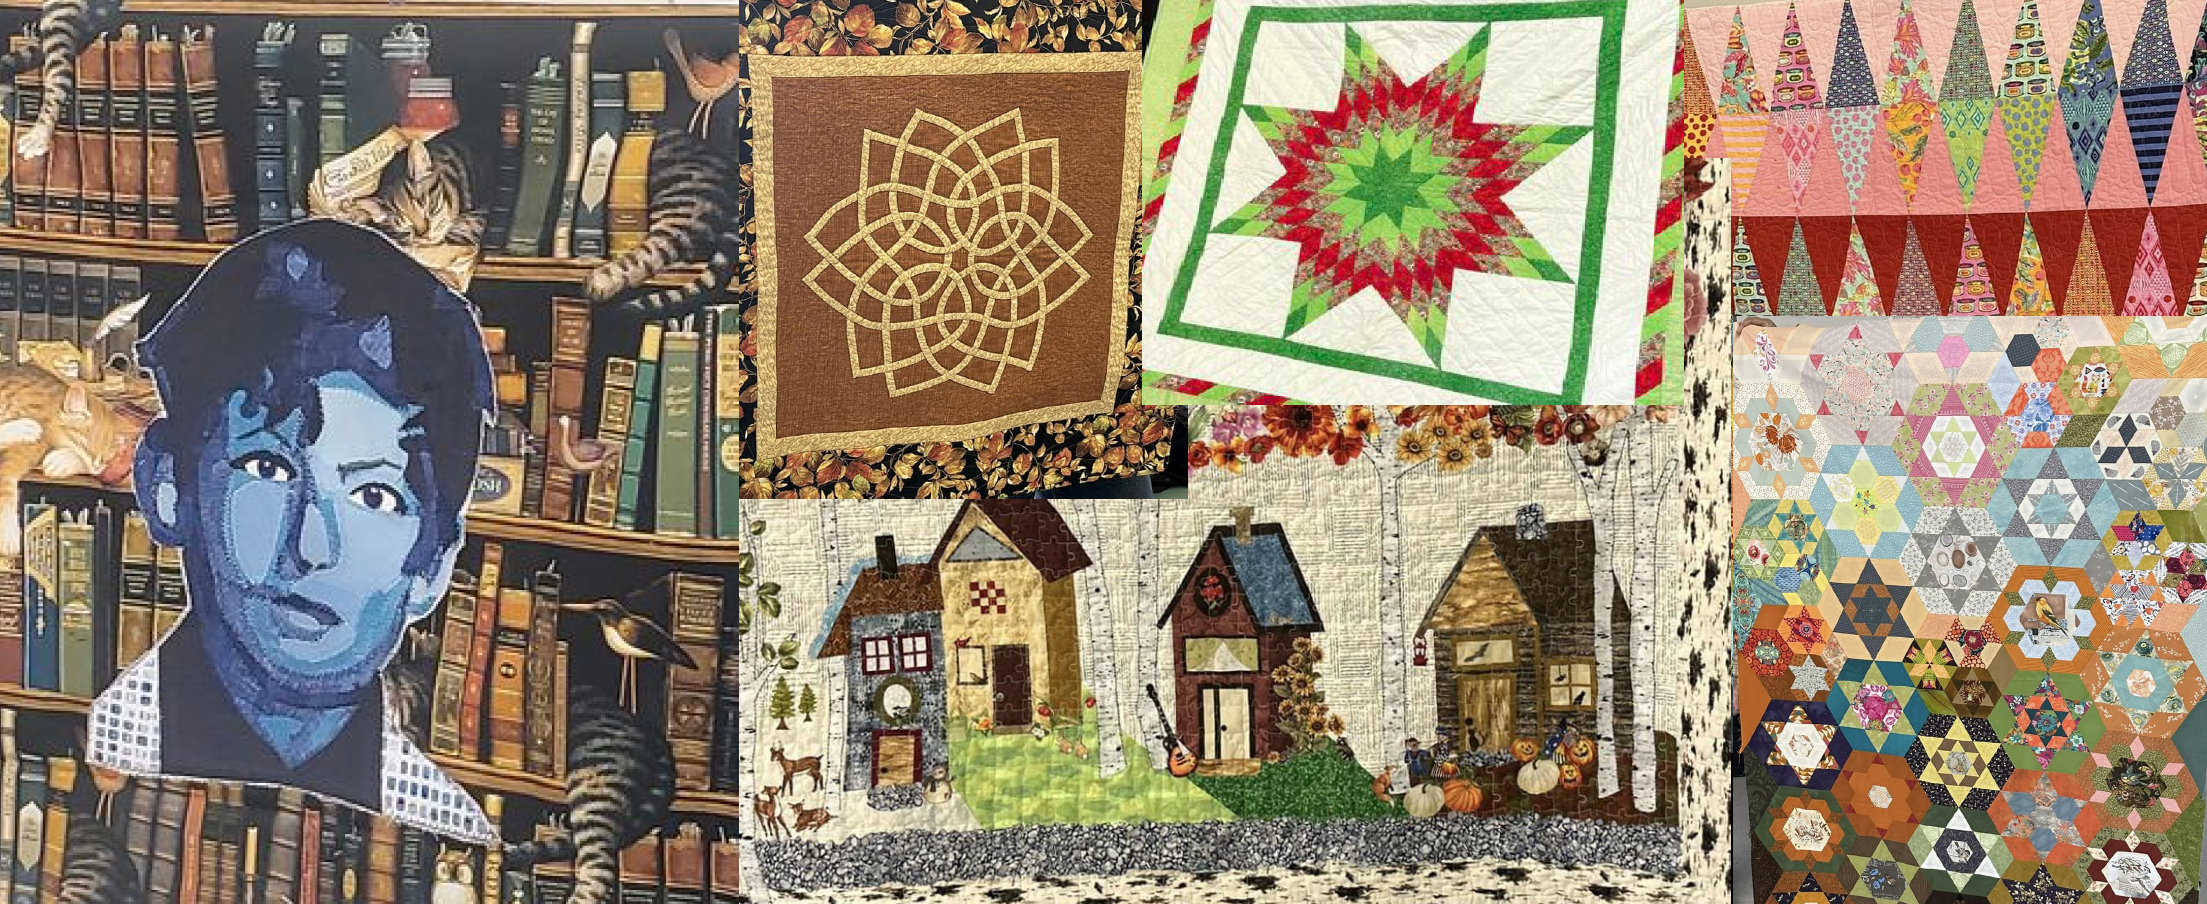 Lake of the Woods Quilter’s Guild 37th Annual Quilt Show